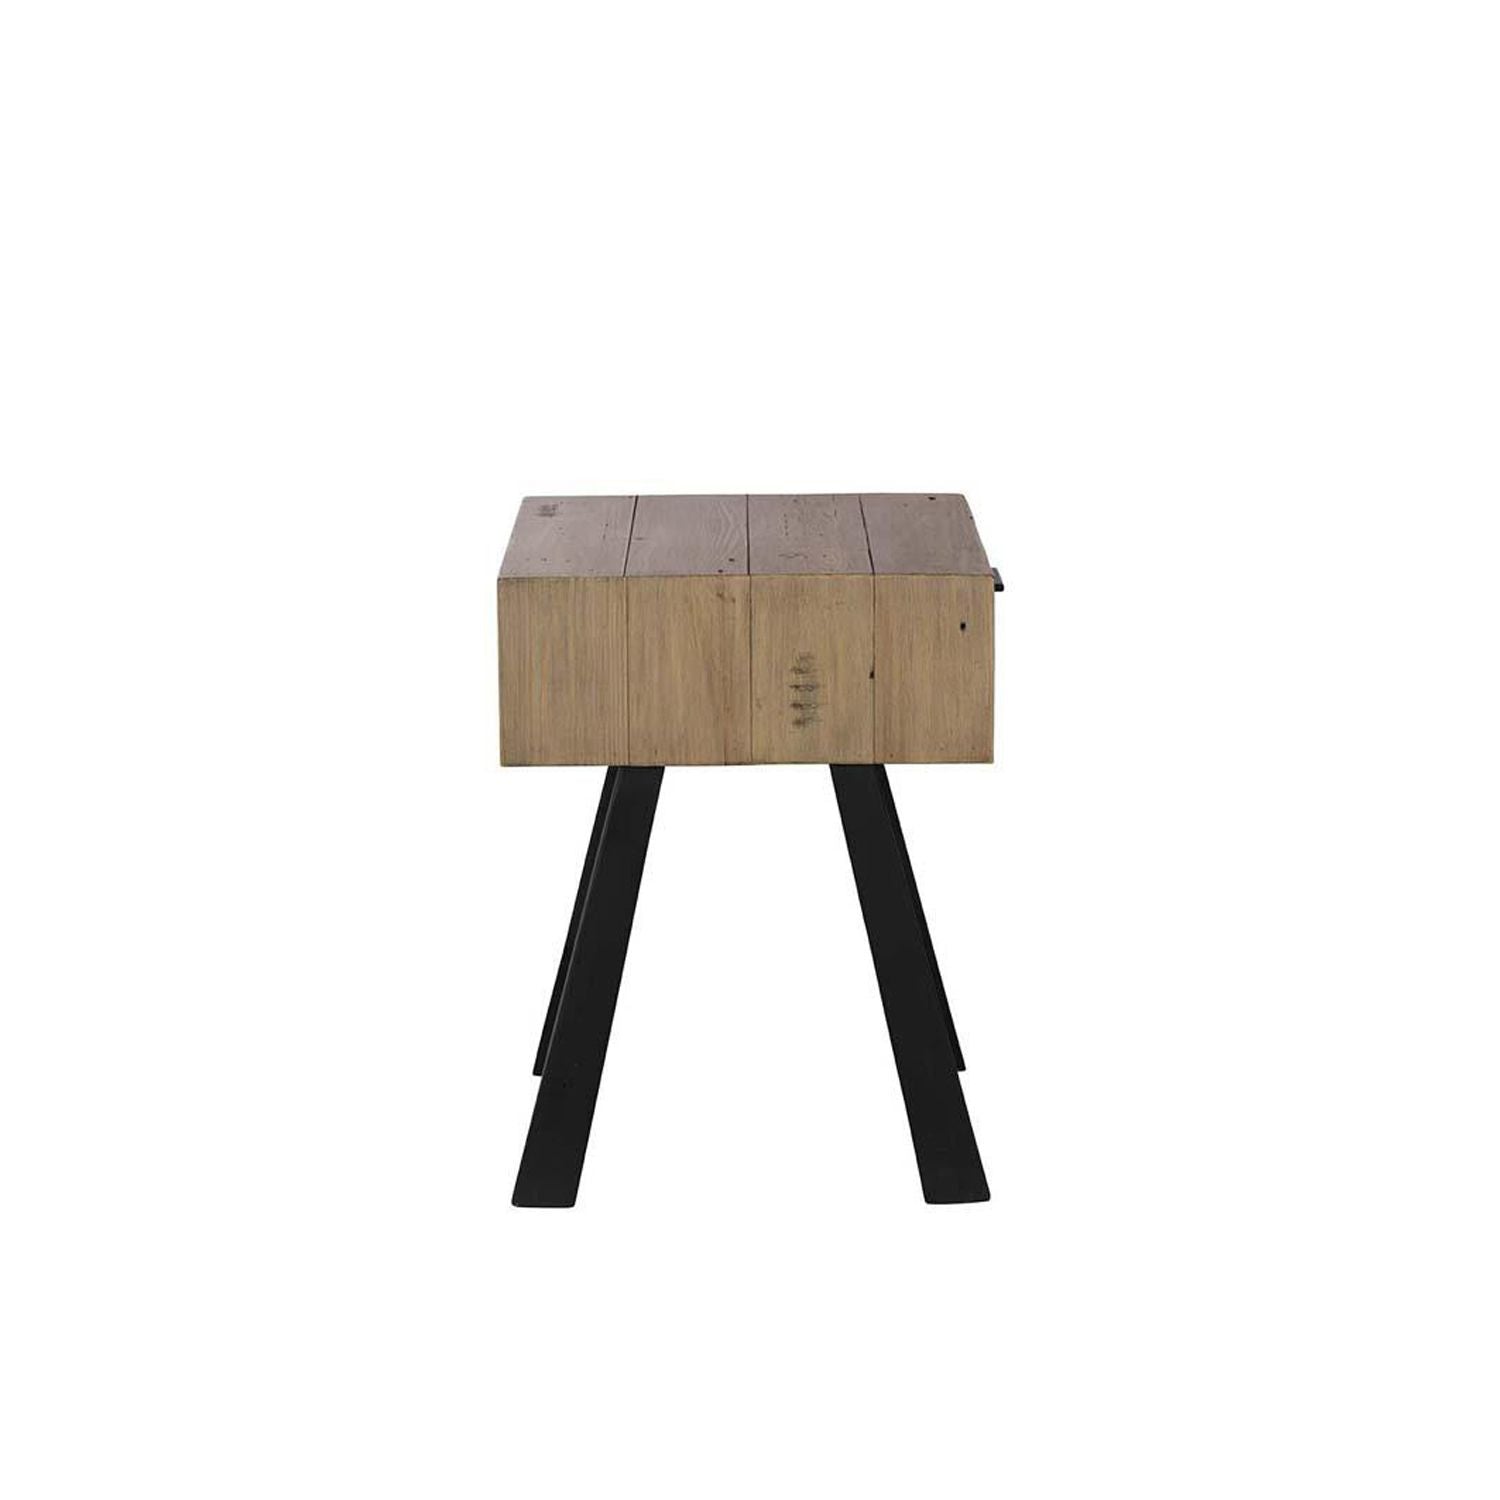 Lawrence Hill Lamp Table